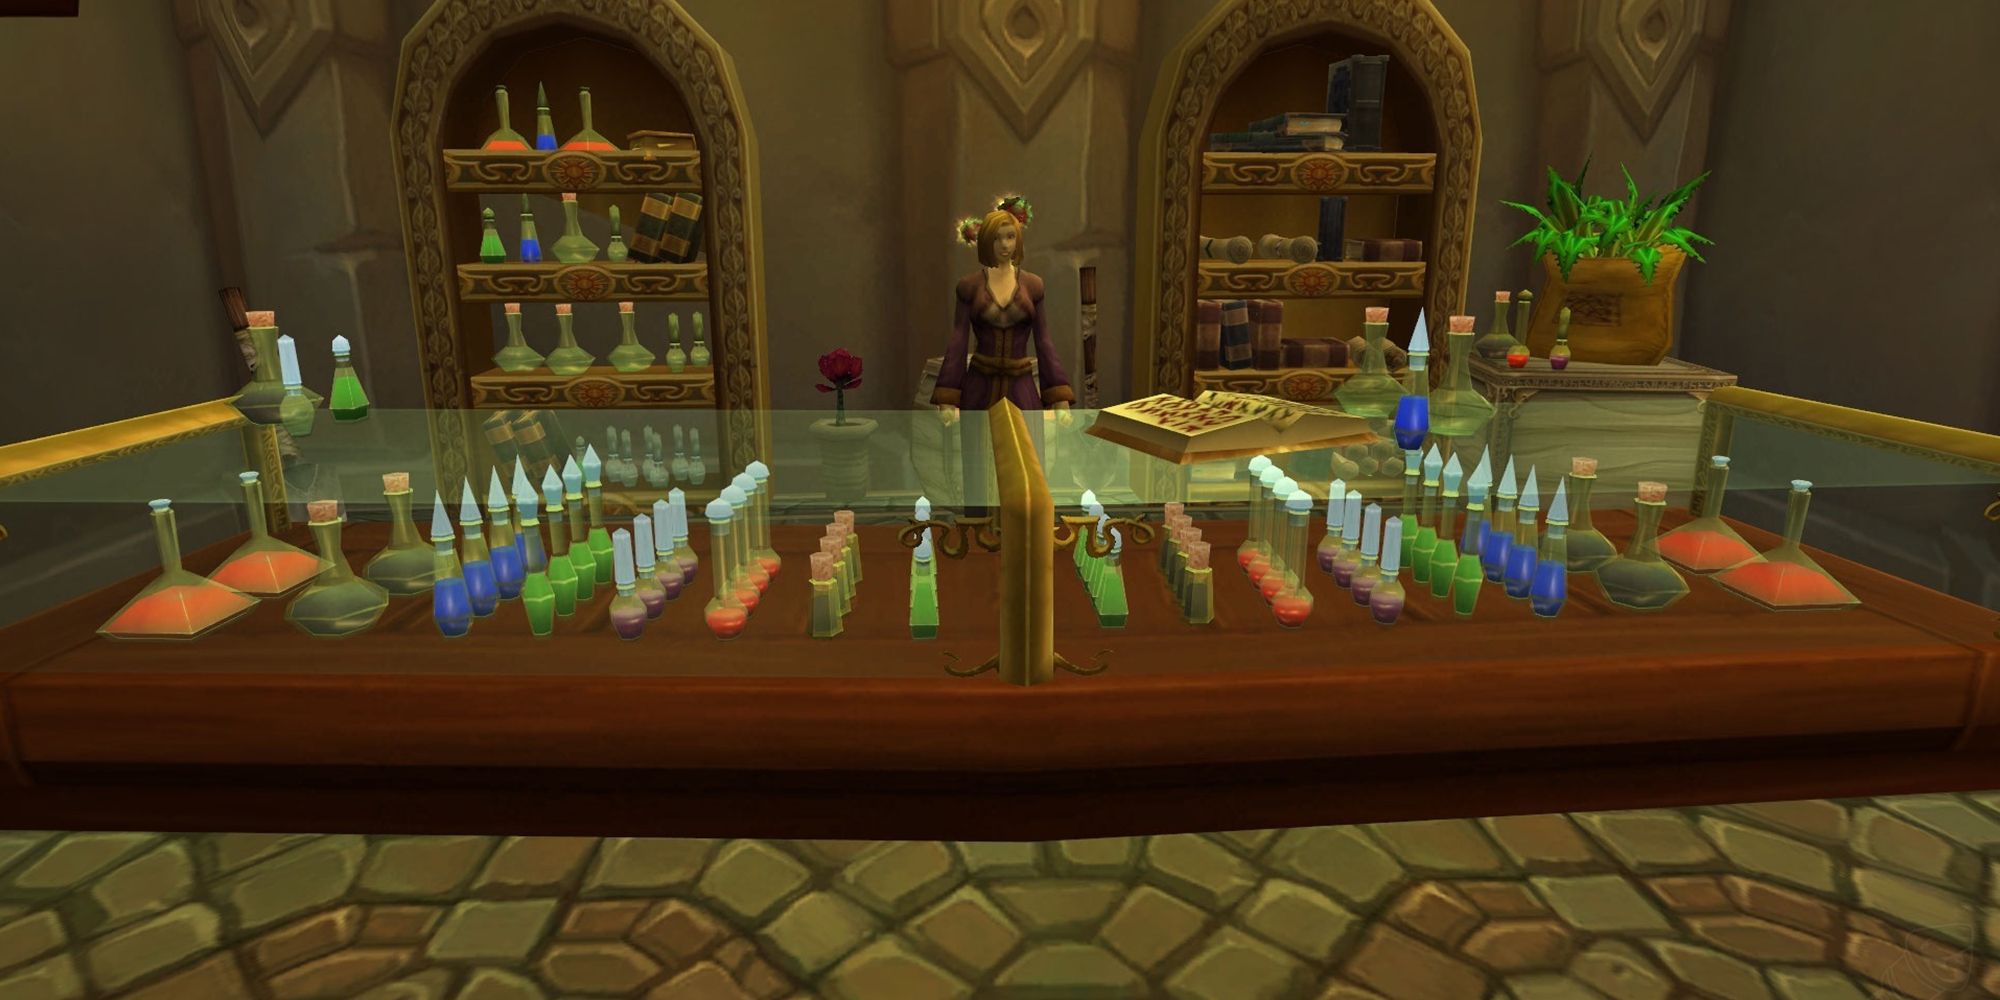 An alchemy shop filled with potions and elixirs